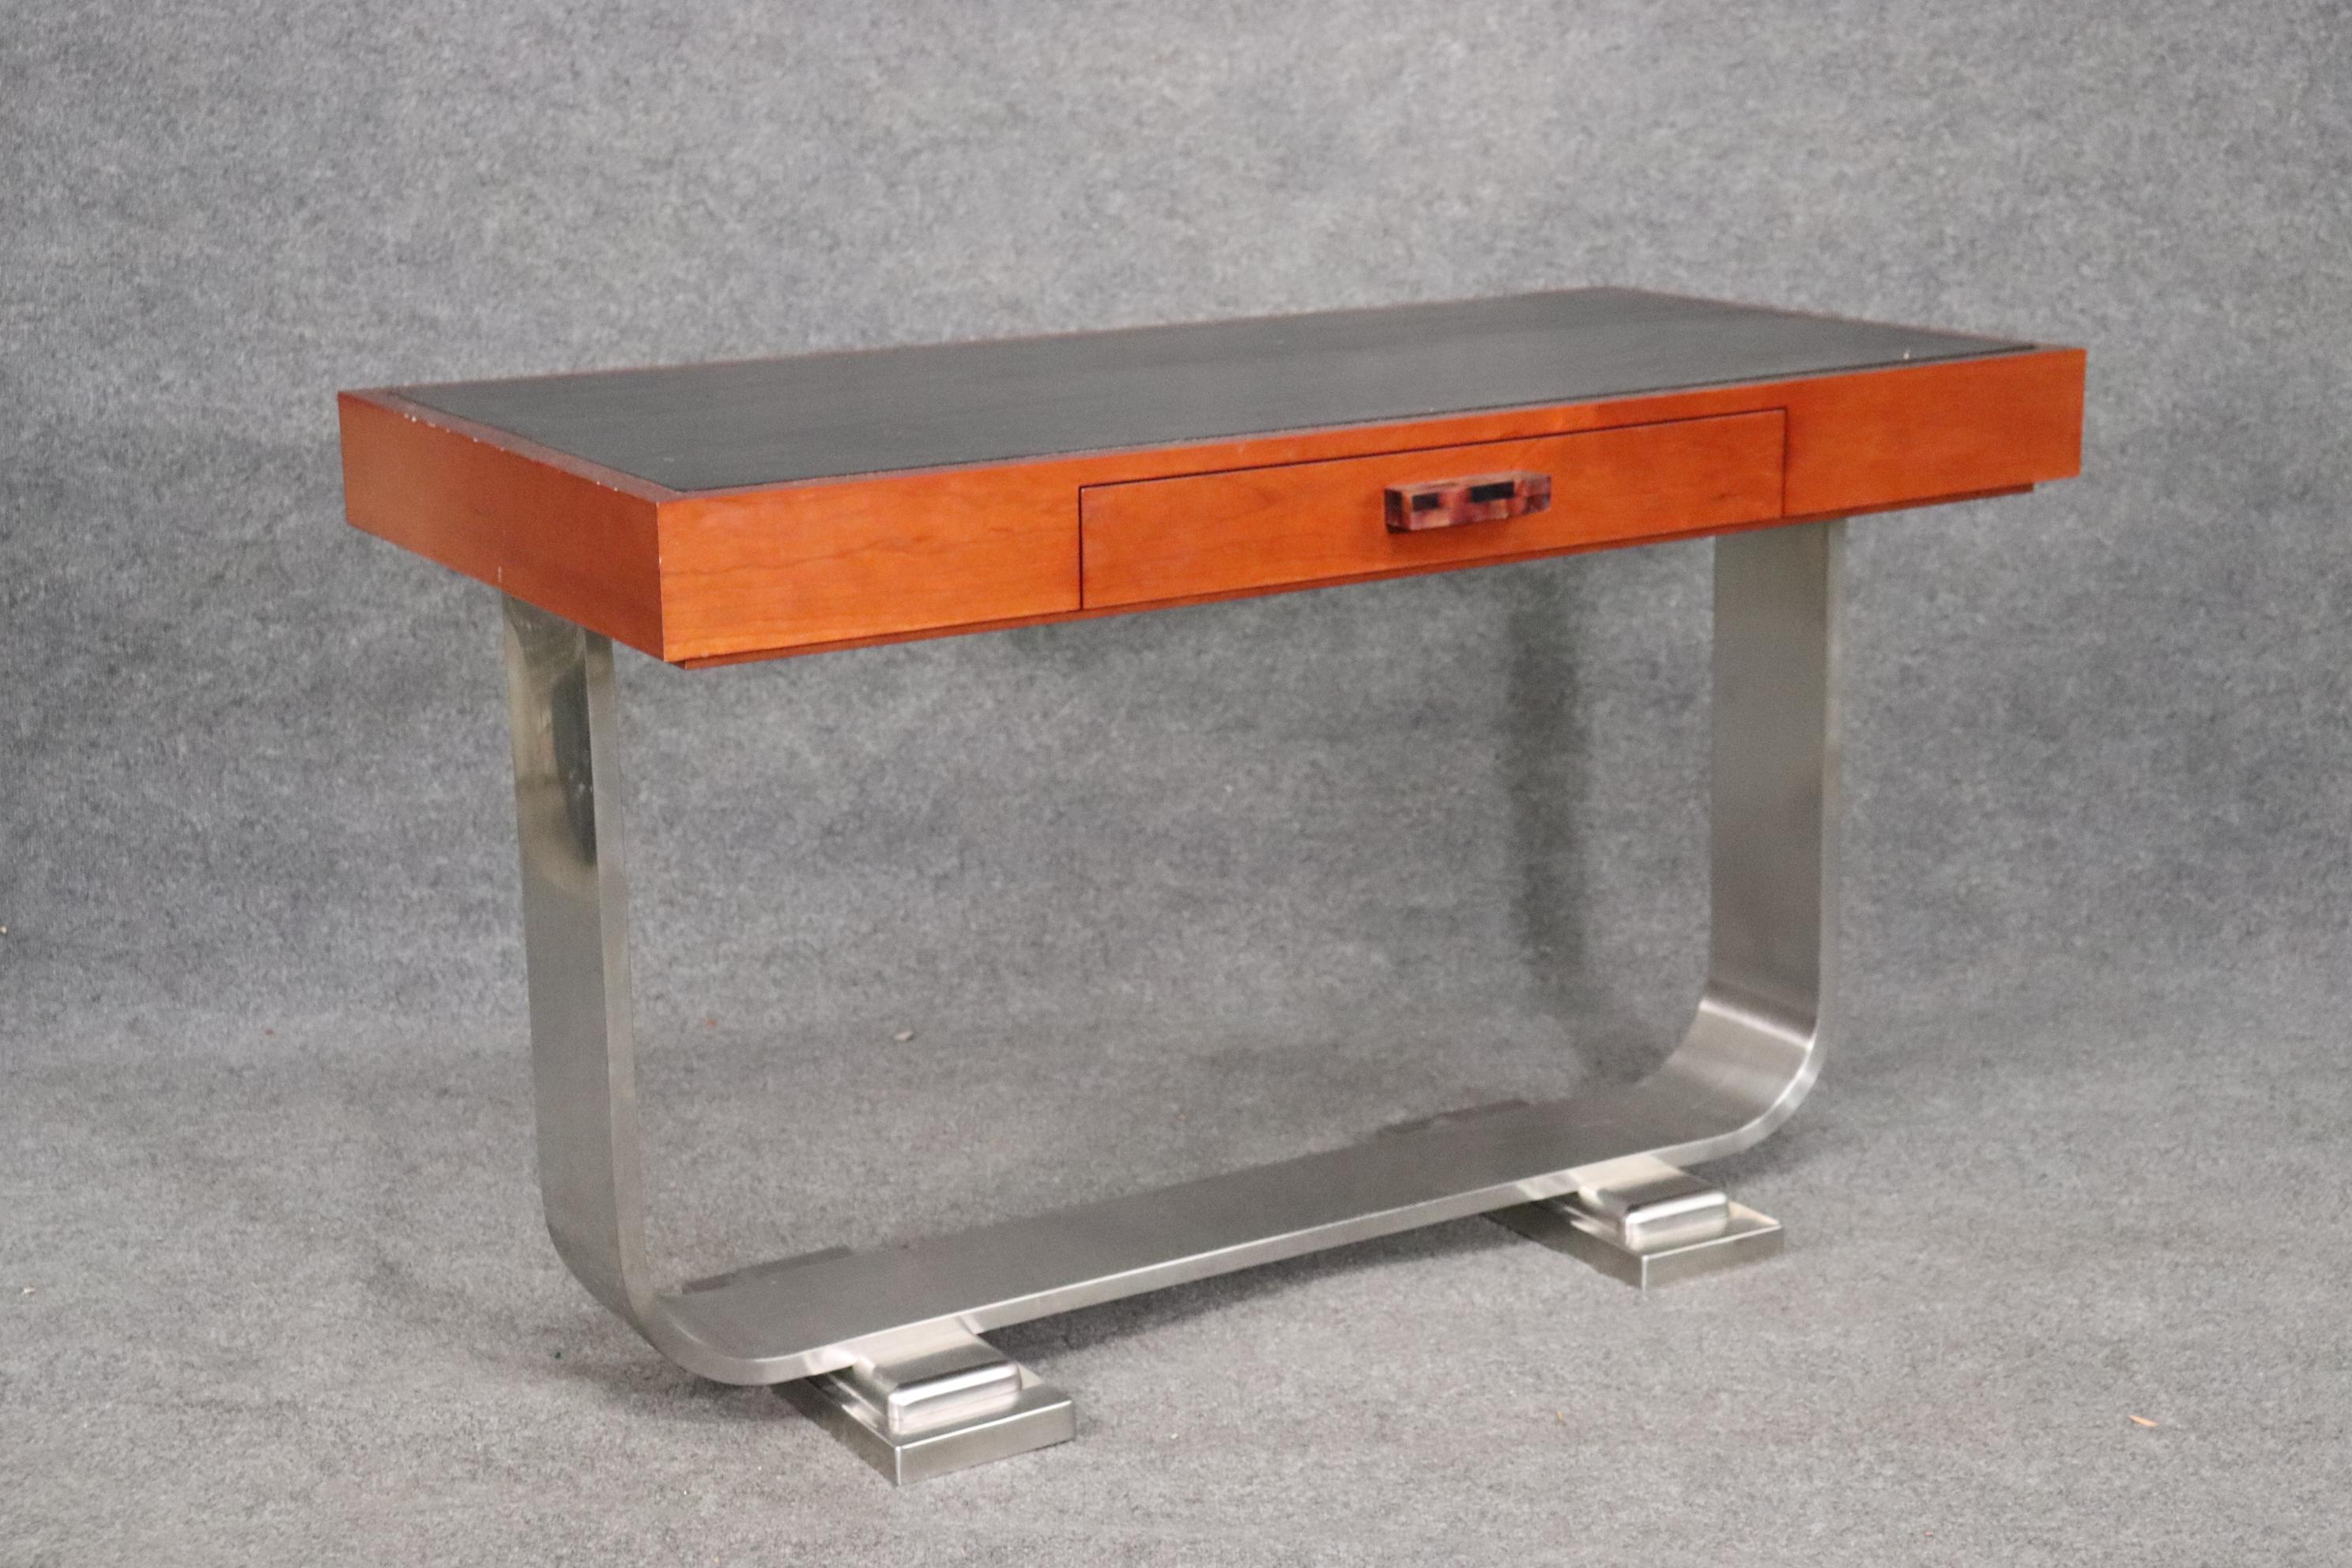 This is a beautiful Art Deco style custom-made writing table with a tasselated bone handle and birch. The base is solid stainless steel. The desk has metal runners on the drawer for smooth operation. The desk measures 48 wide x 24 deep x 30 tall.